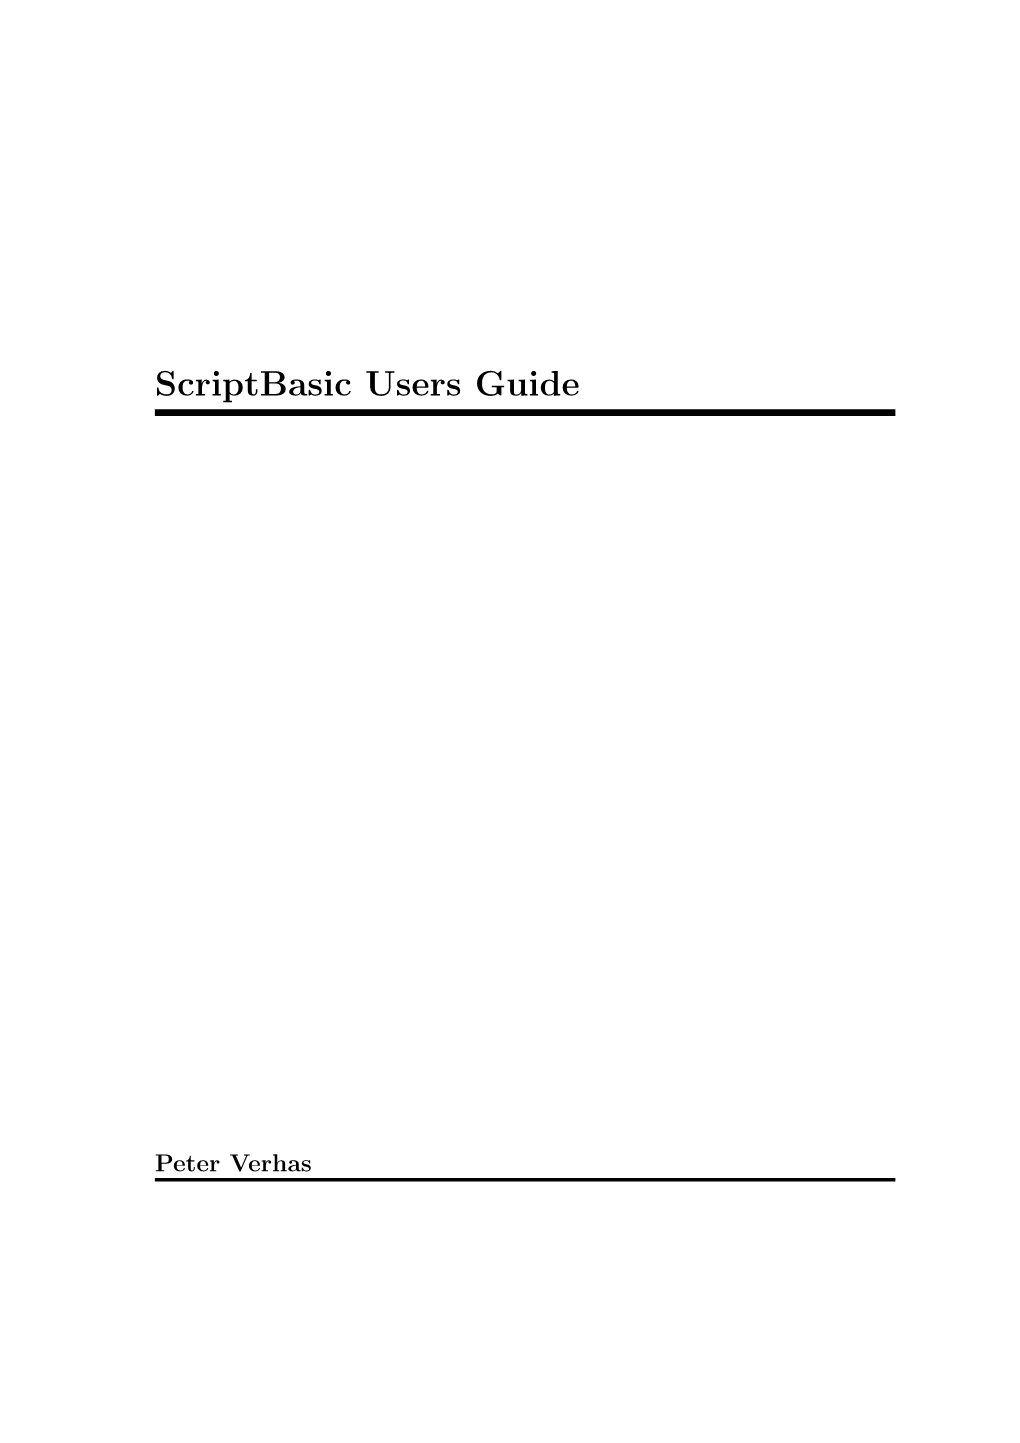 Scriptbasic Users Guide